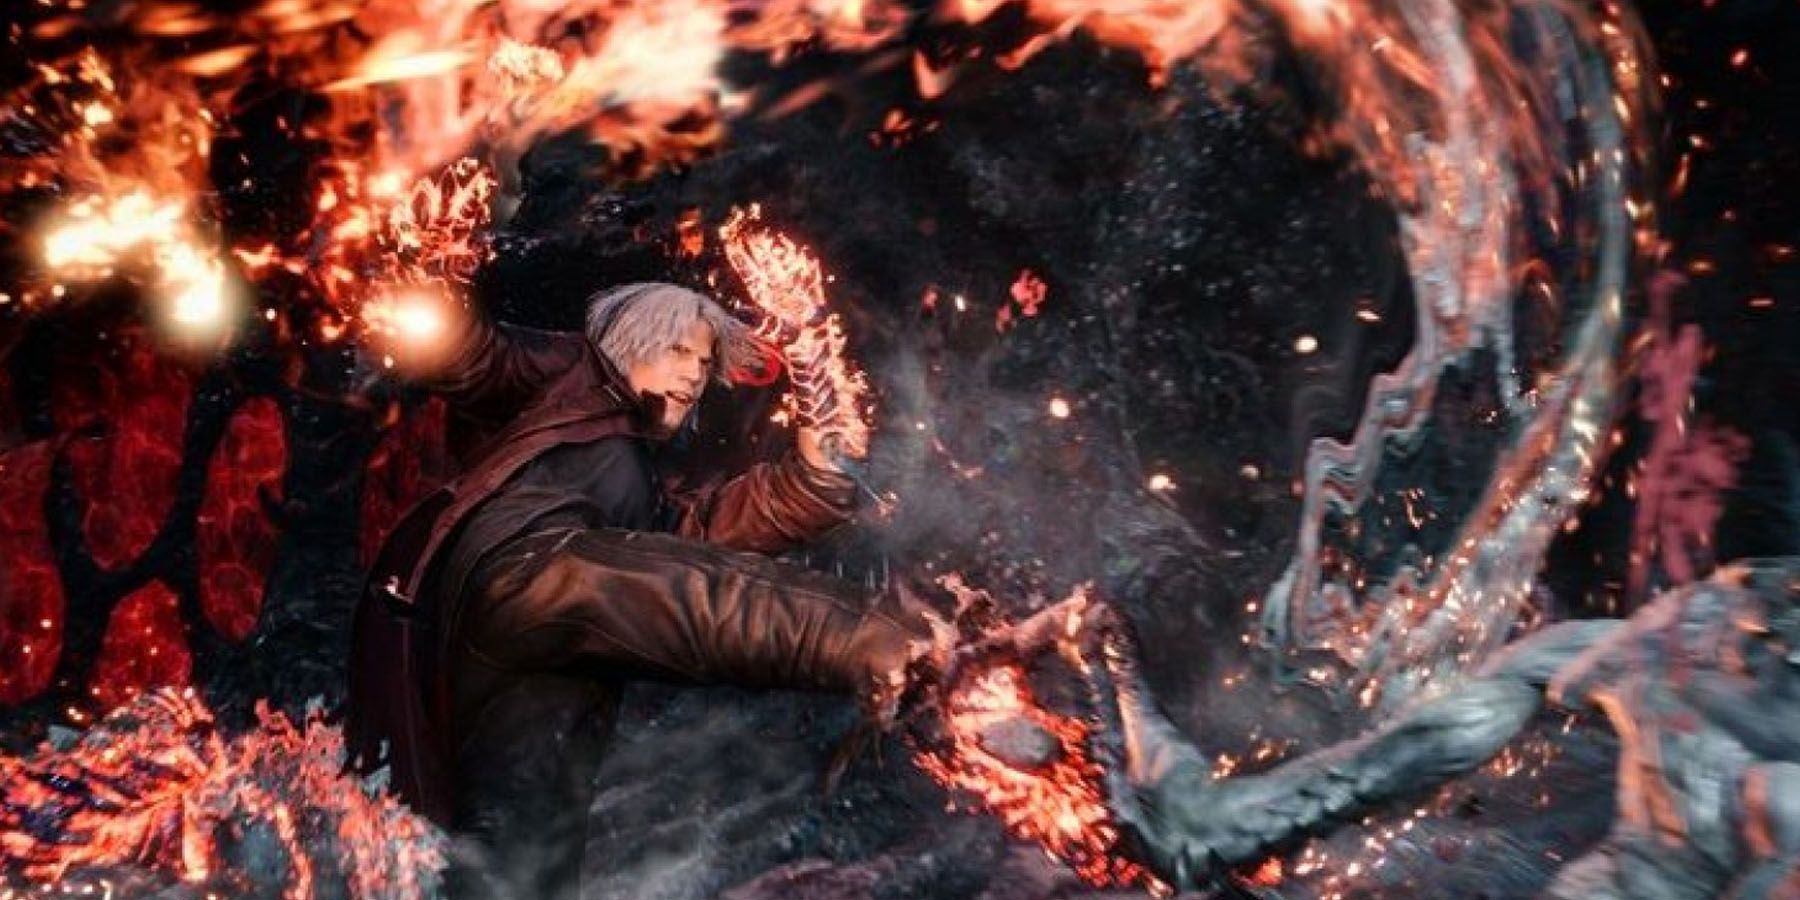 Dante attacking with Balrog